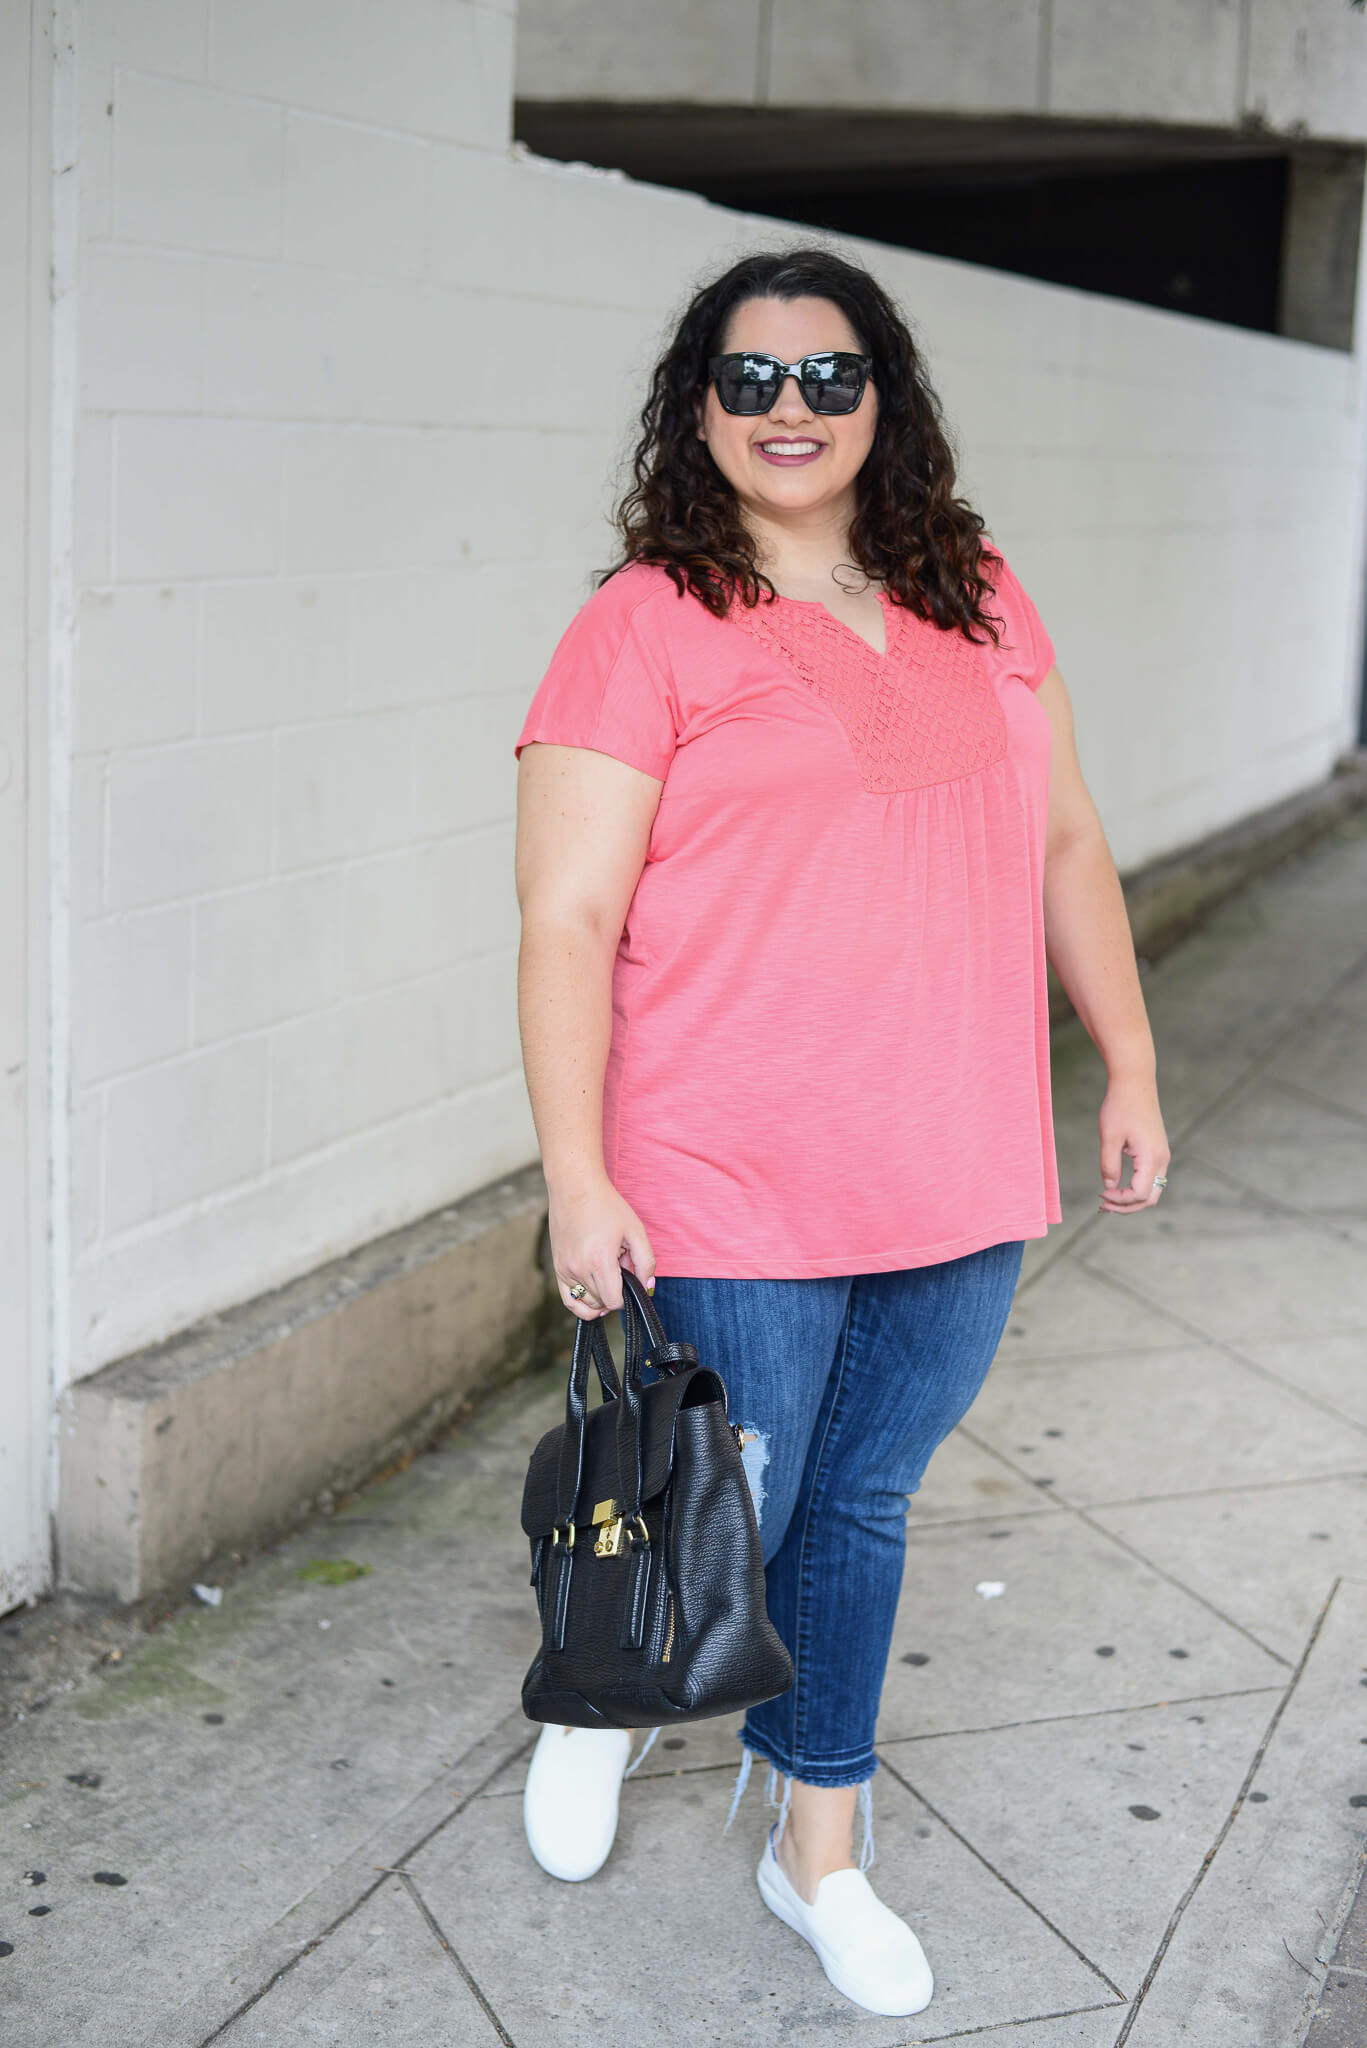 A bright cotton top from the Modern Curvy brand, Just My Size, if just what I need for the warm summers